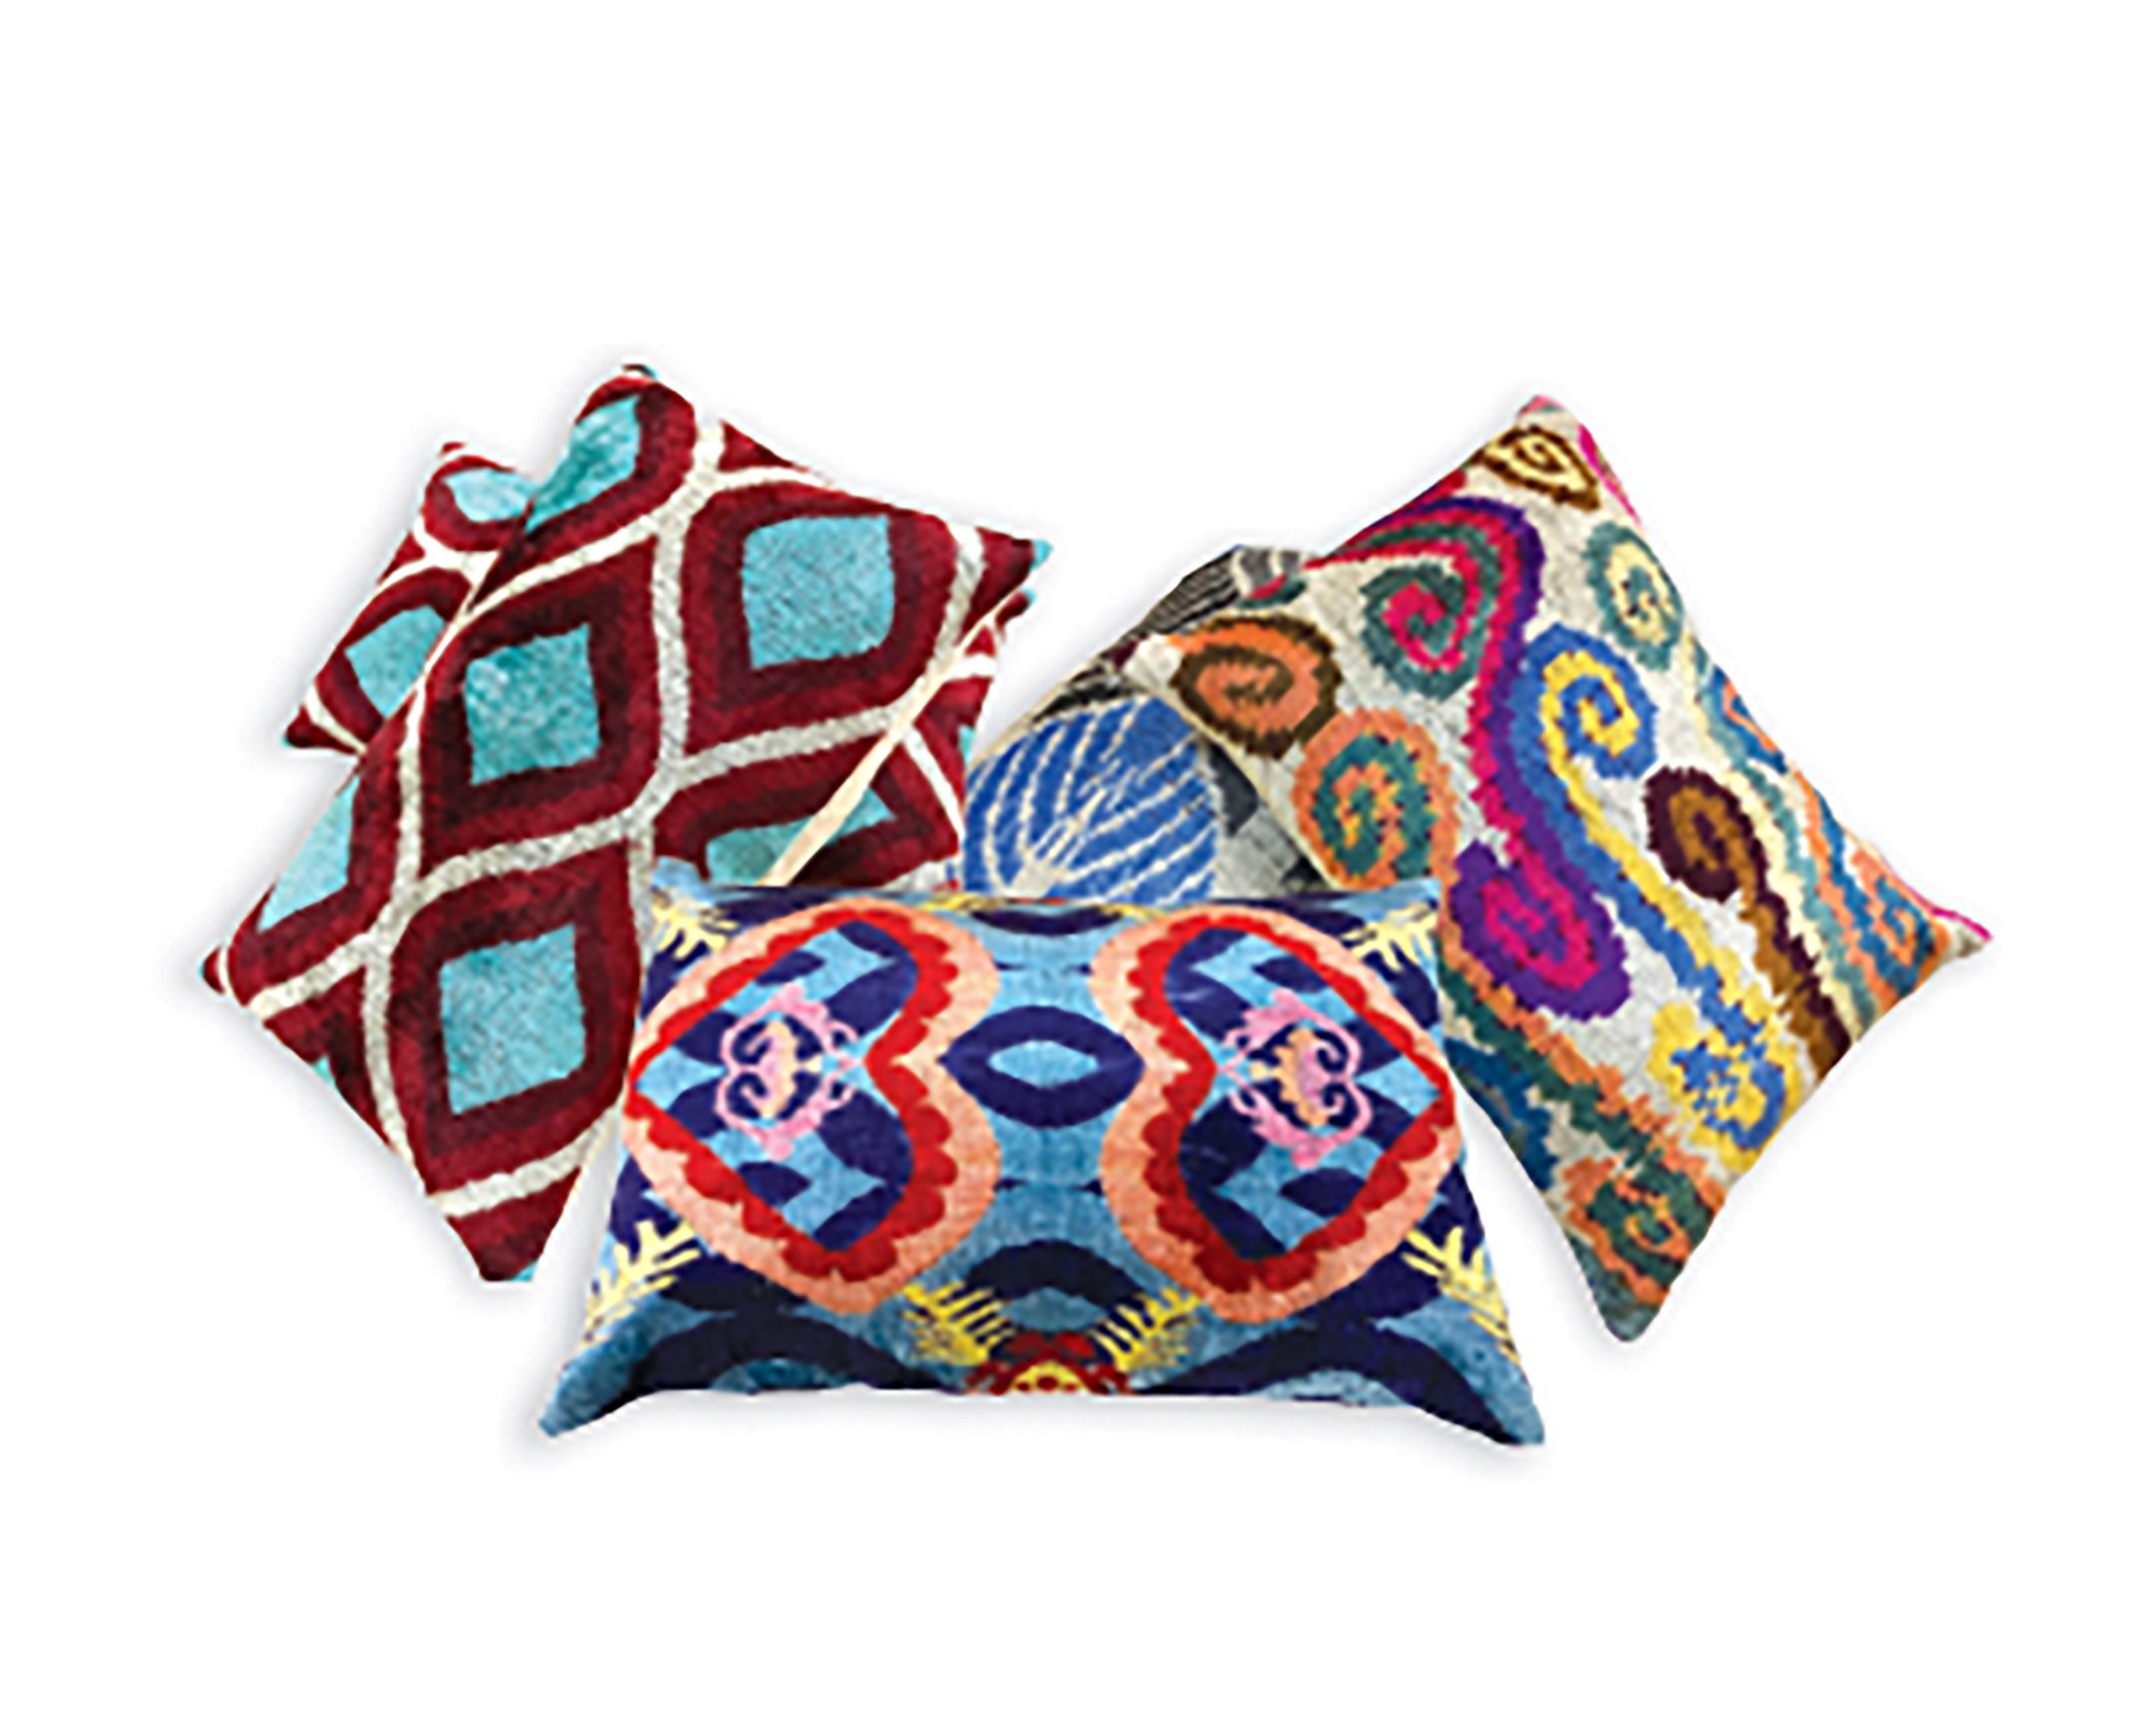  Mix and match with an eclectic array of patterns, colours and sizes. These unique Uzbeki Silk Velvet Pillow Covers are handmade in Turkey and will add a stylish boho vibe to your abode.  www.ledgerandlooms.com  